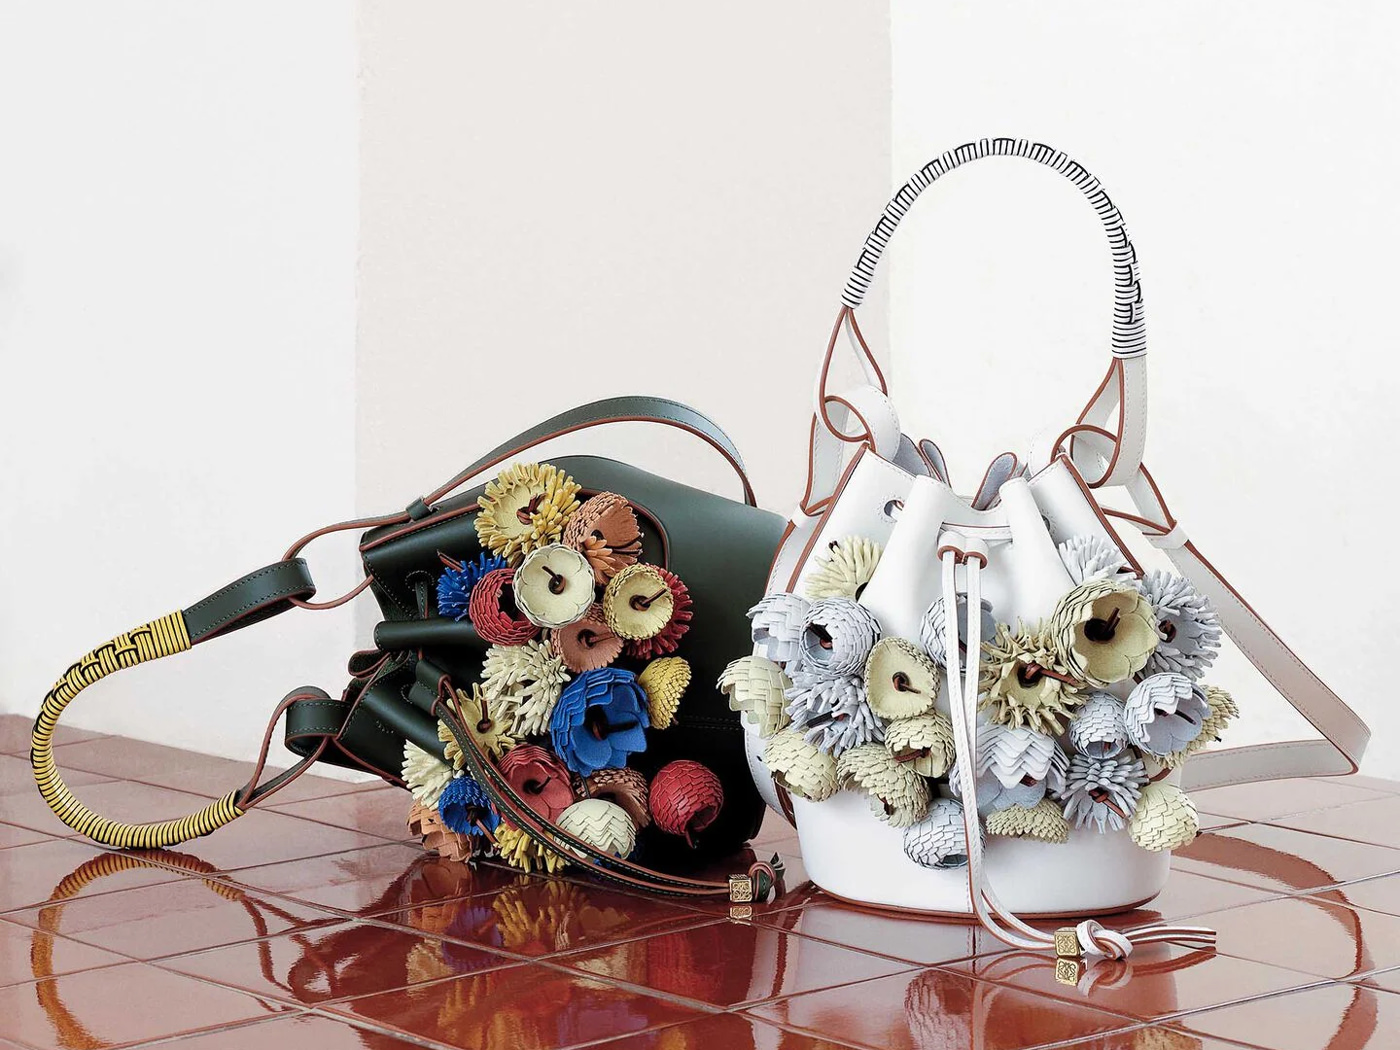 Loewe's New Collection Is an Ode to Modern Craft